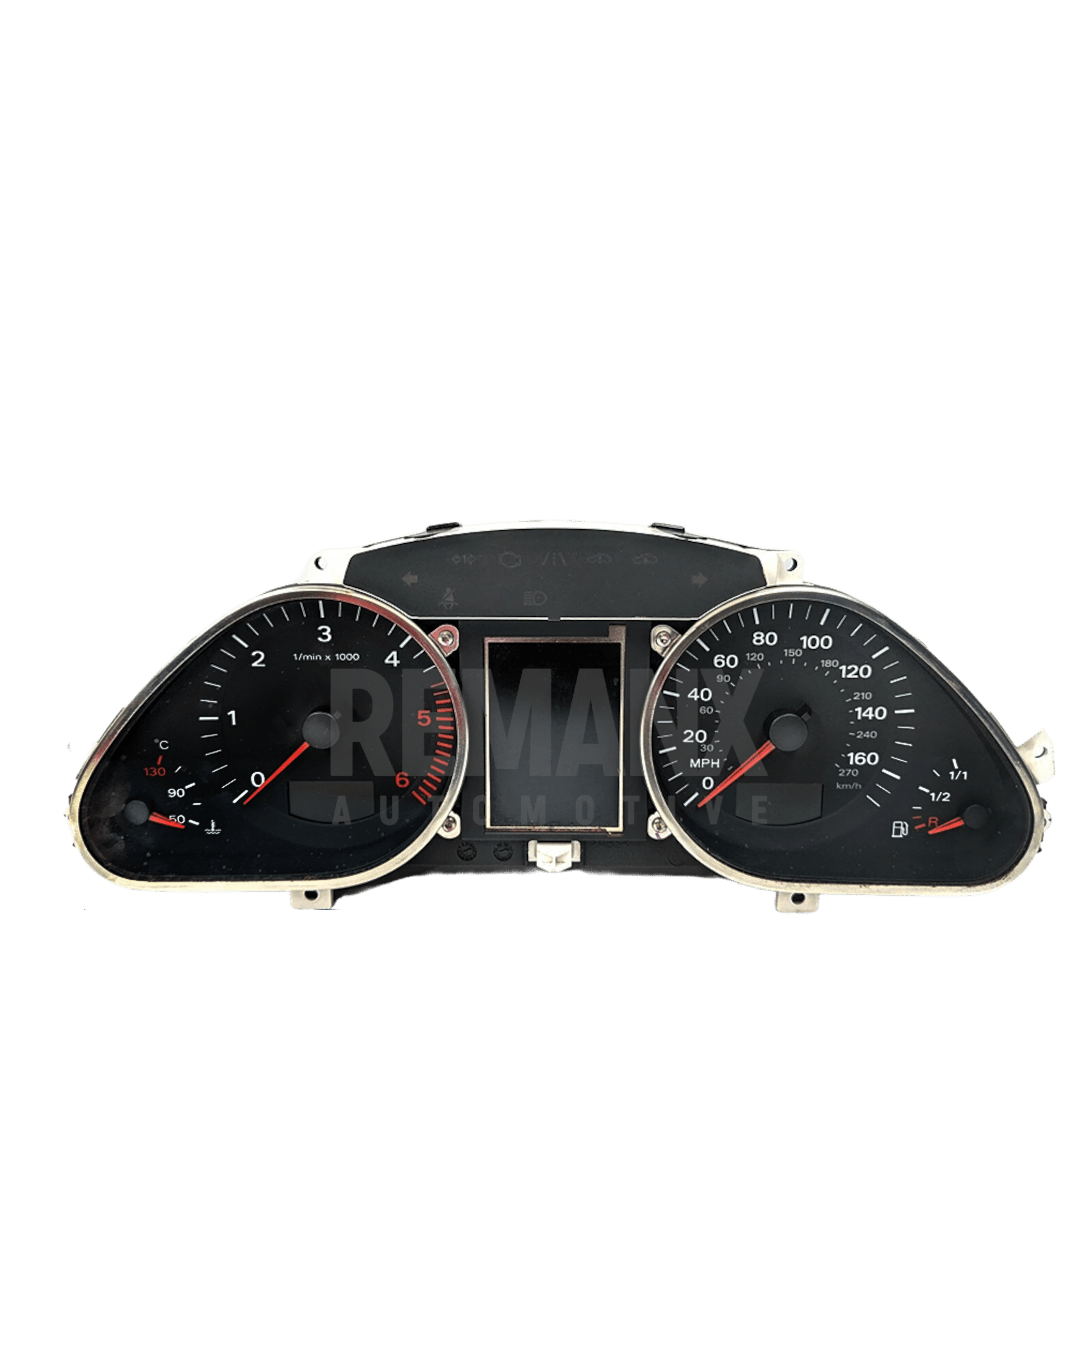 Audi Q7 Instrument cluster from Remanx